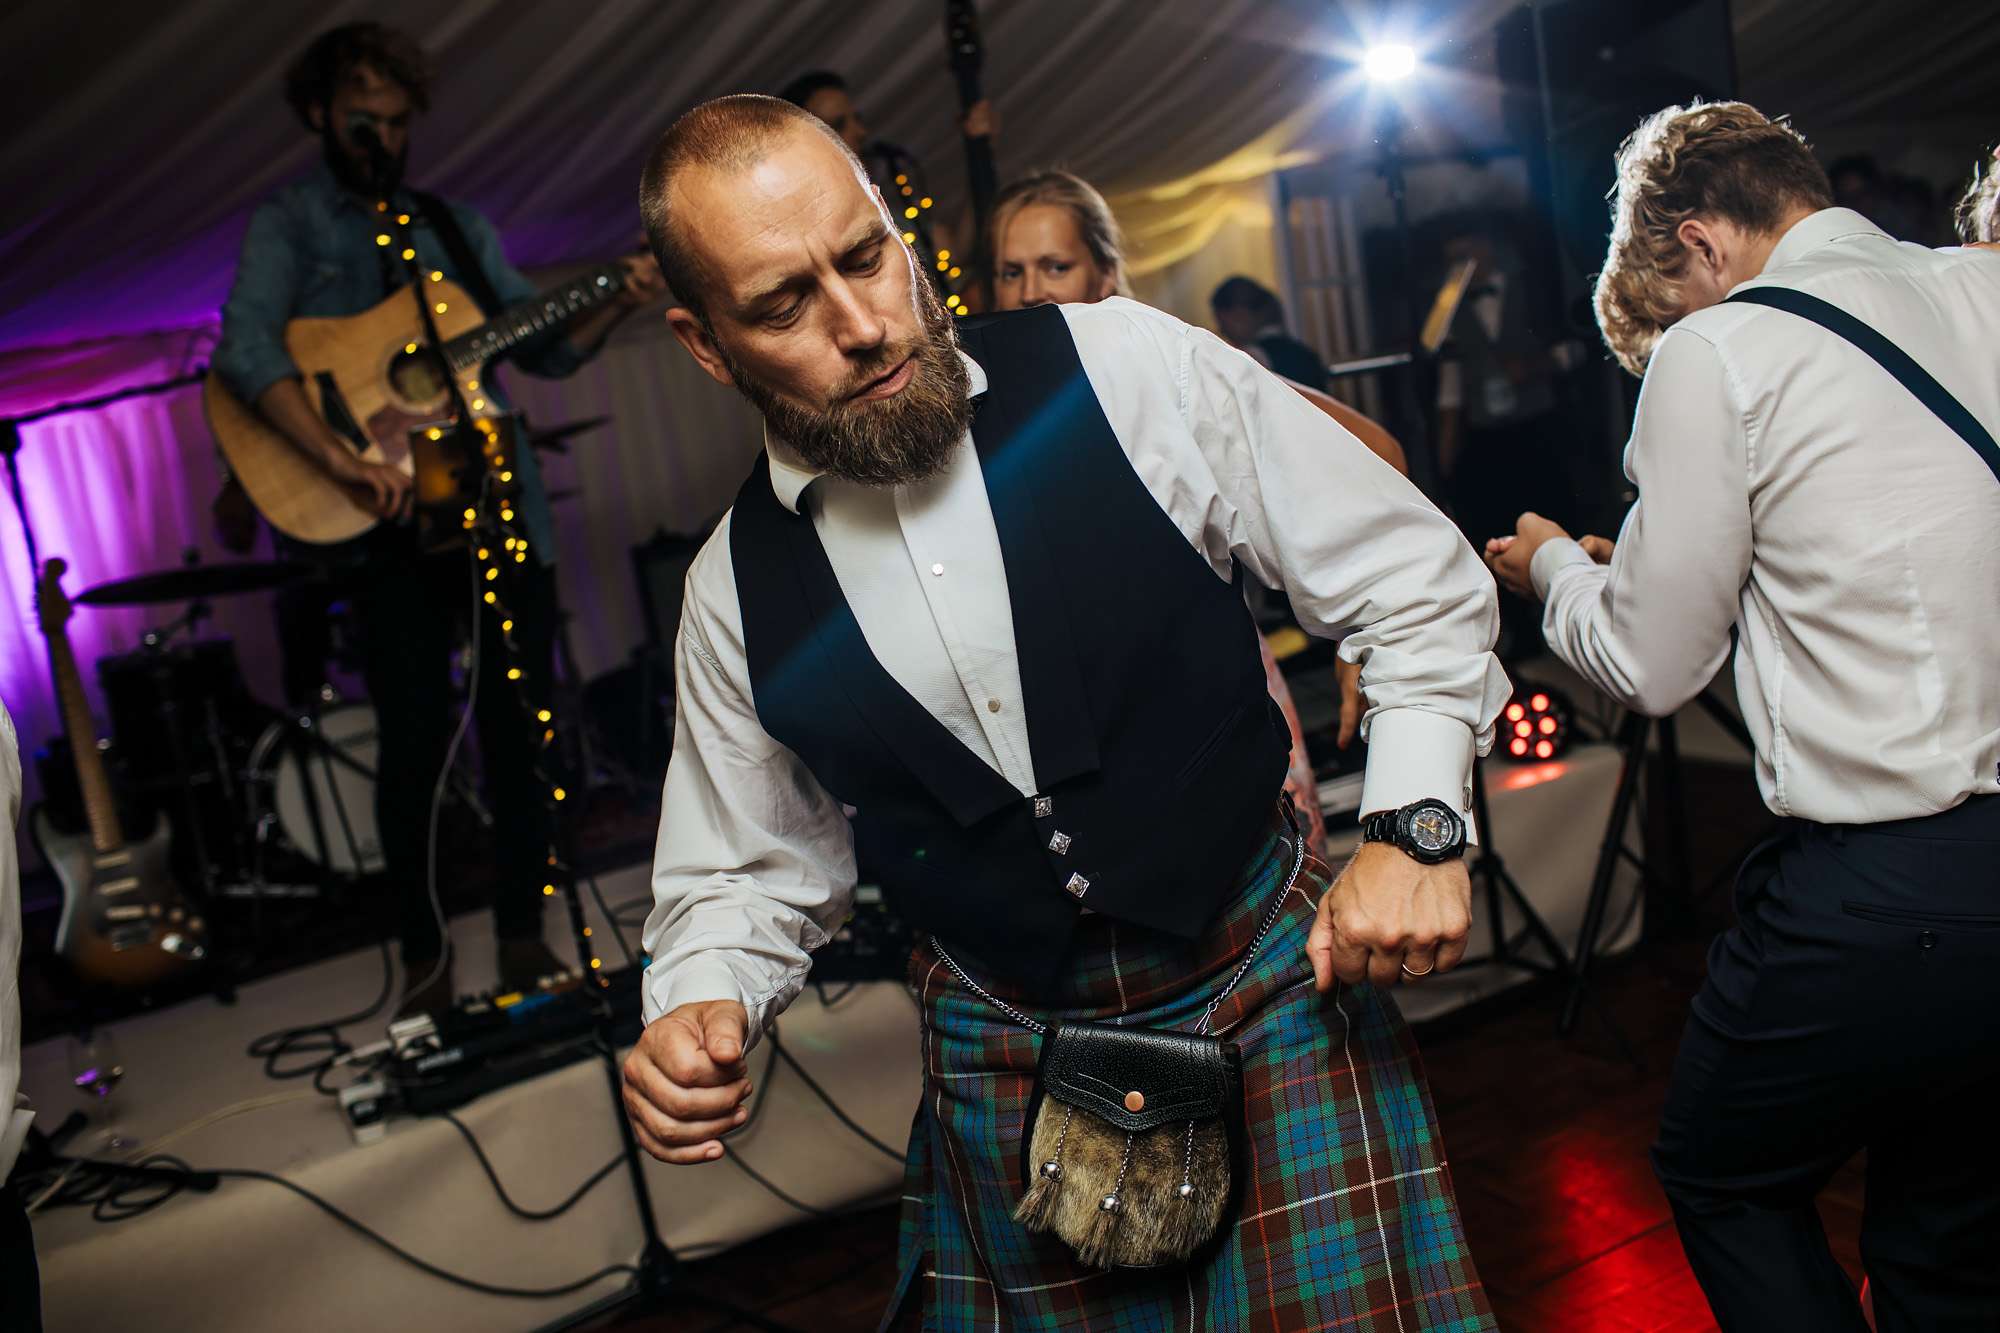 Guest in kilt dancing at a Yorkshire wedding